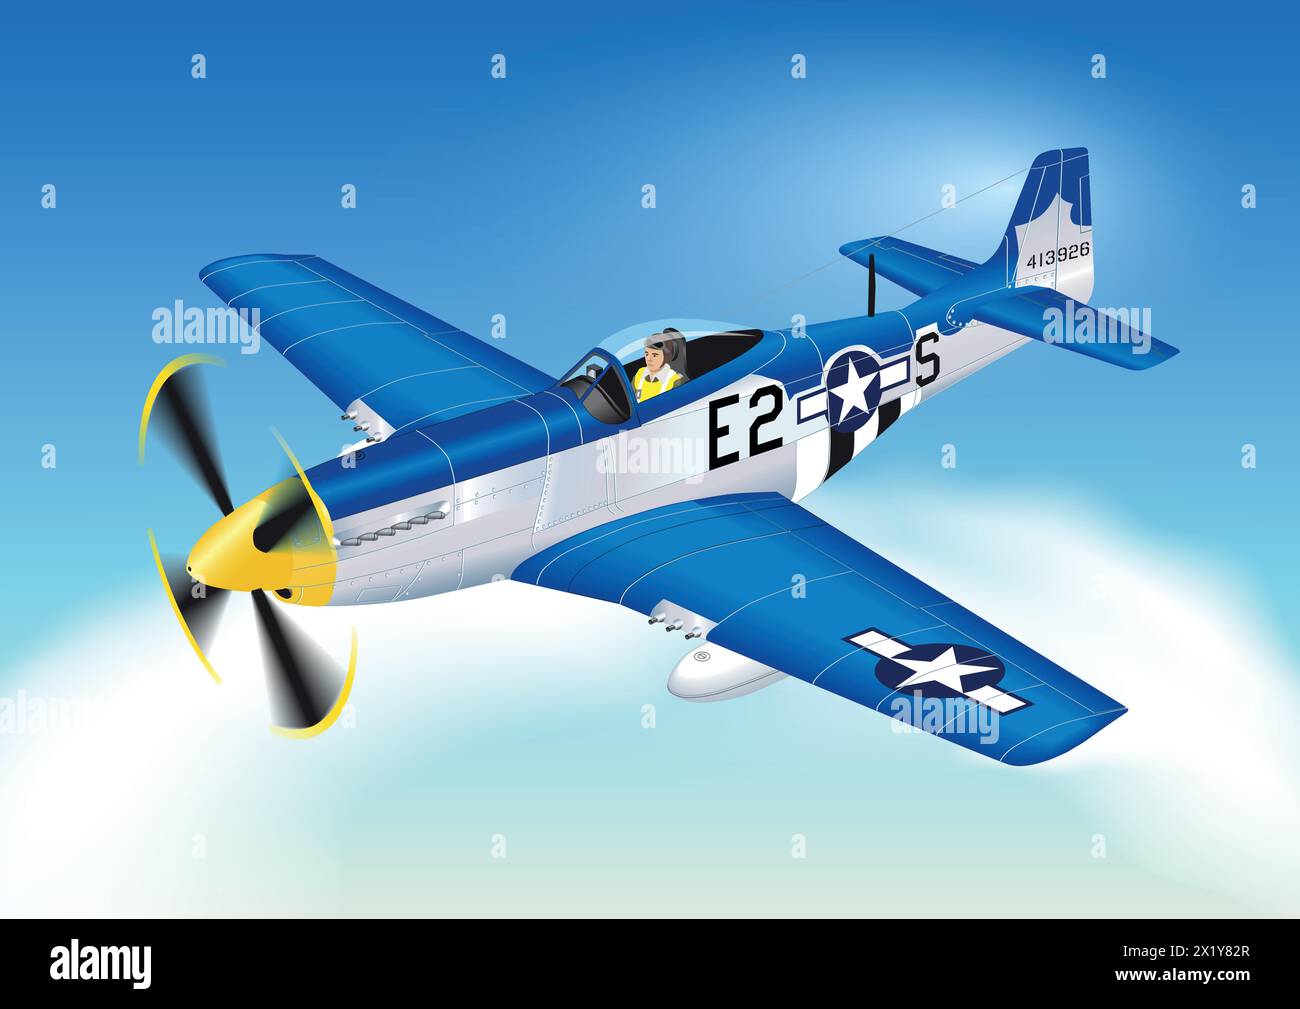 P-51 Mustang Fighter Plane airborne in isometric view. Stock Vector